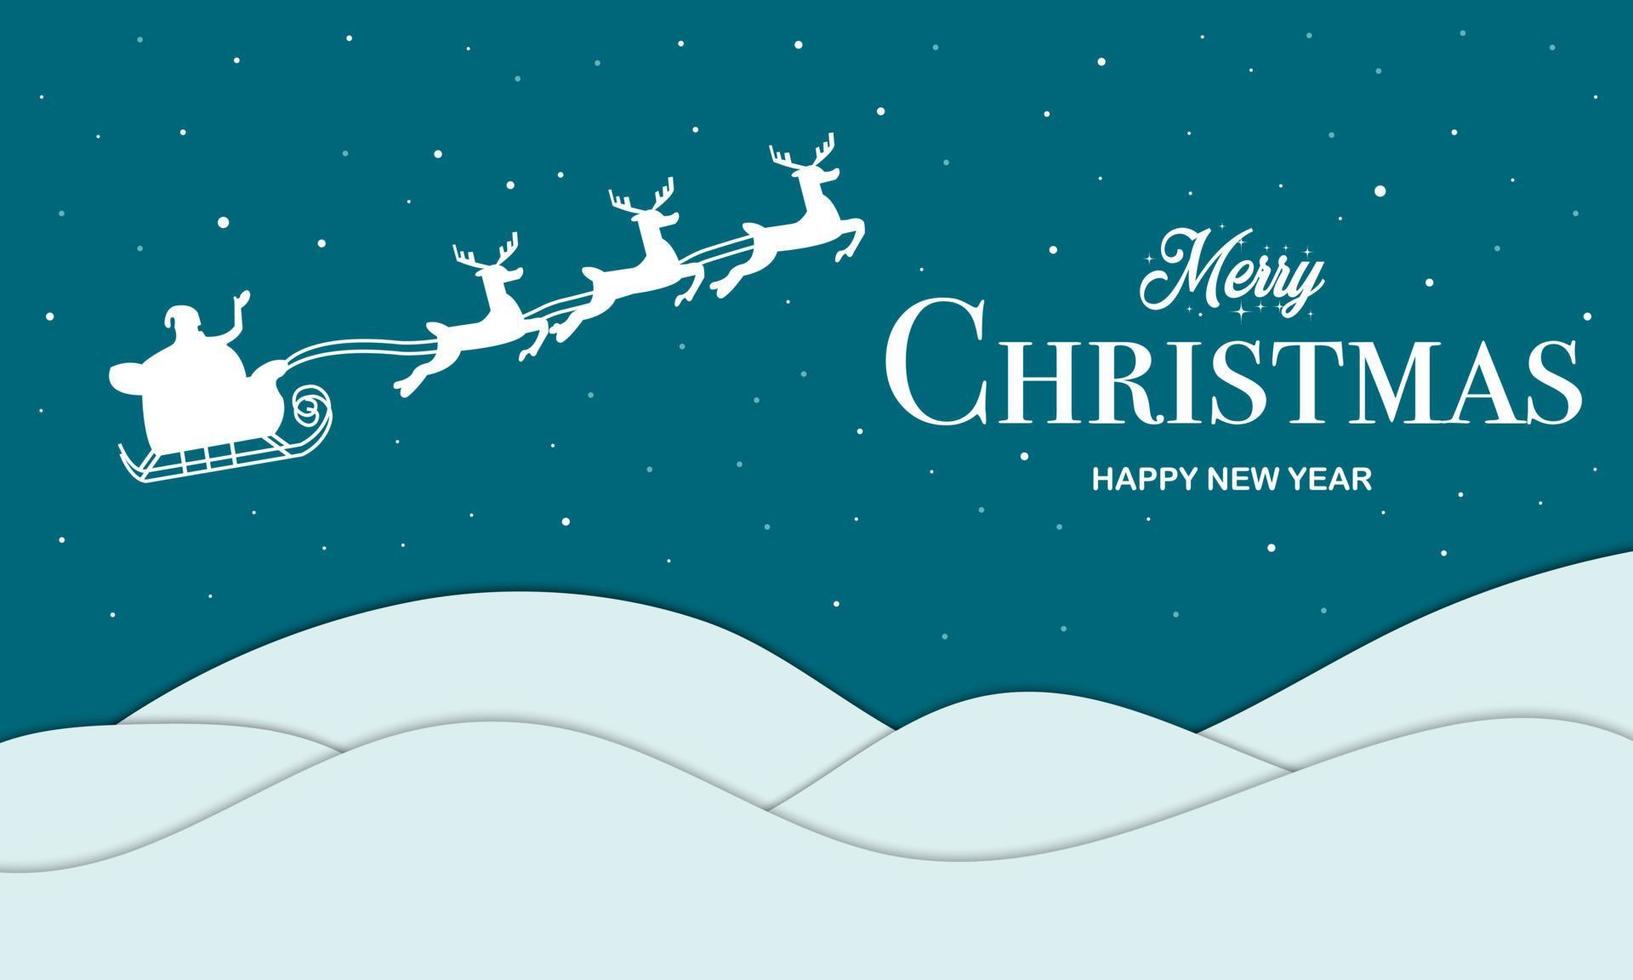 Merry Christmas Happy New Year Banner Template vector